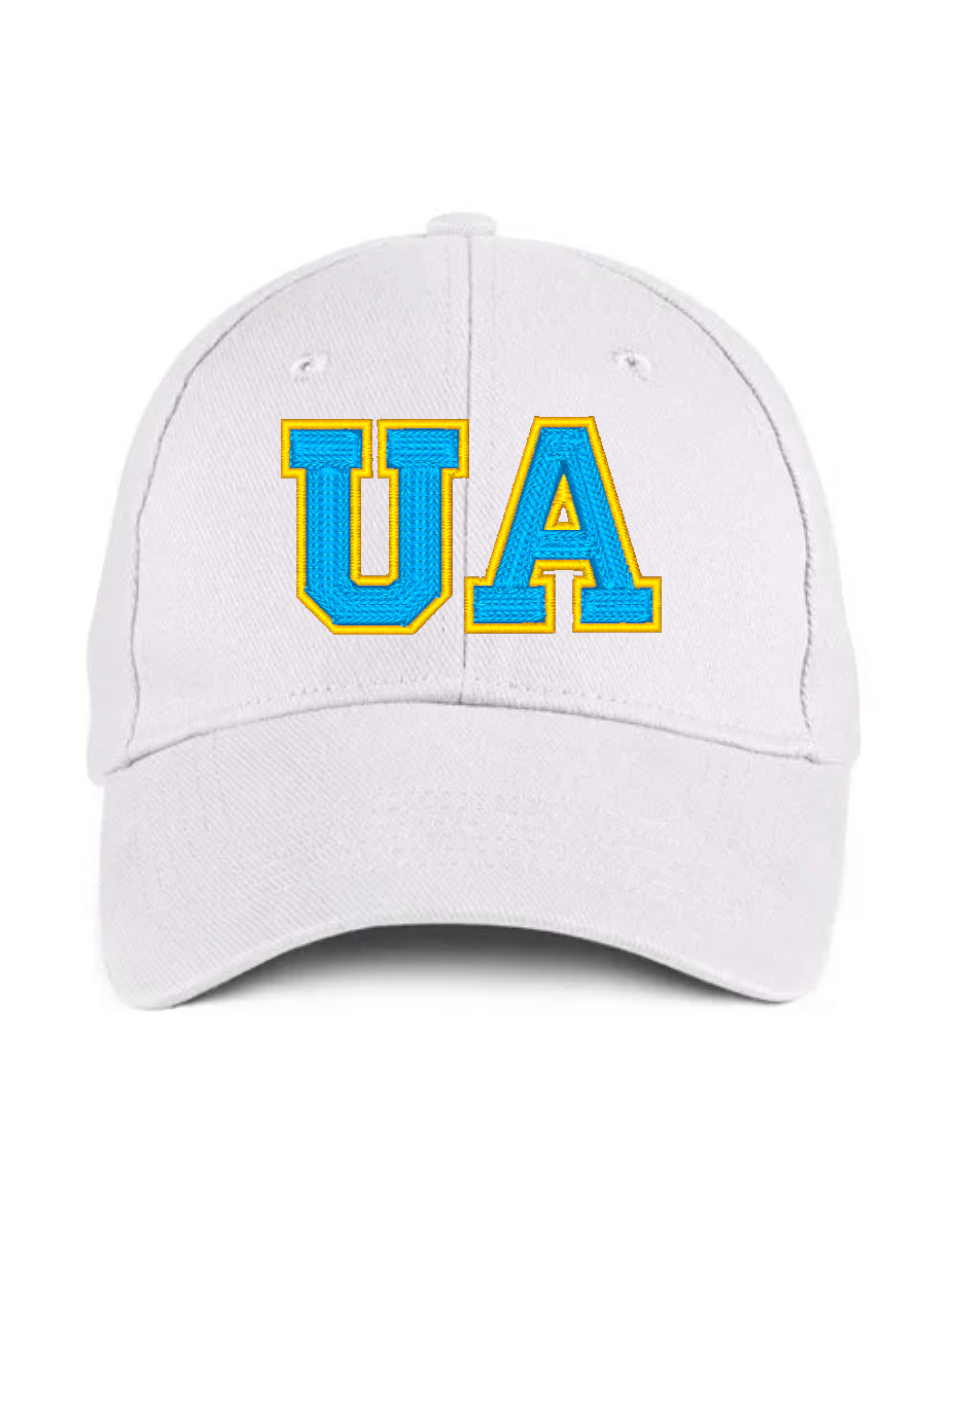 3D embroidered hat "UA"